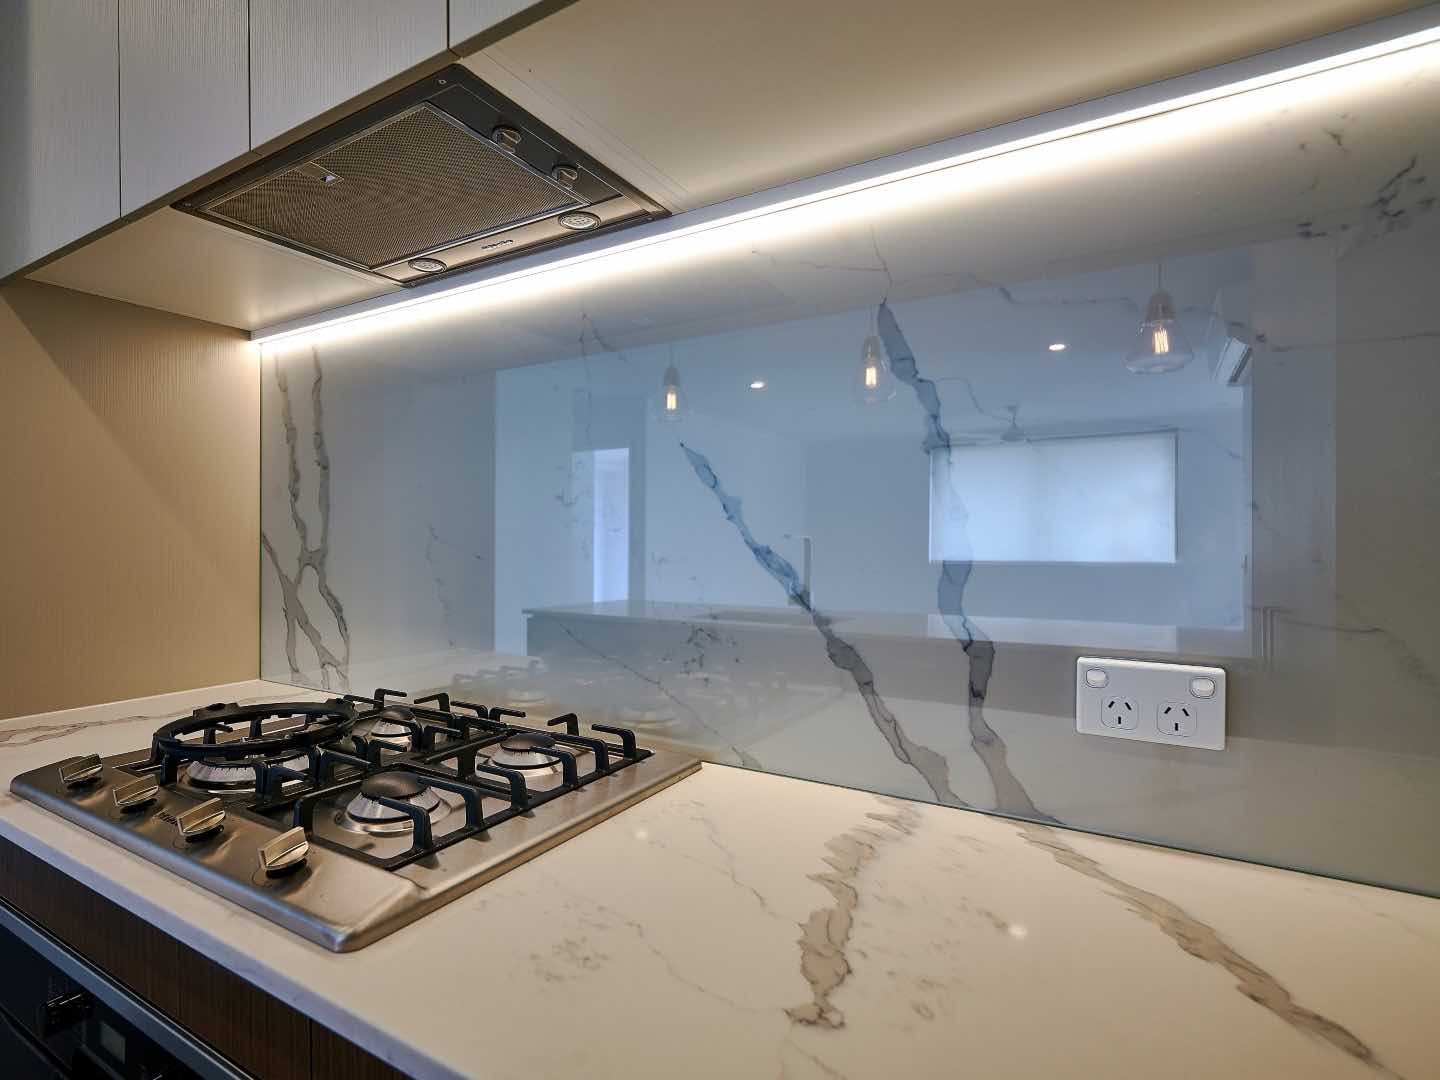 Clear Low Iron Glass Splashback with marble design installed over stone behind cooktop with stove